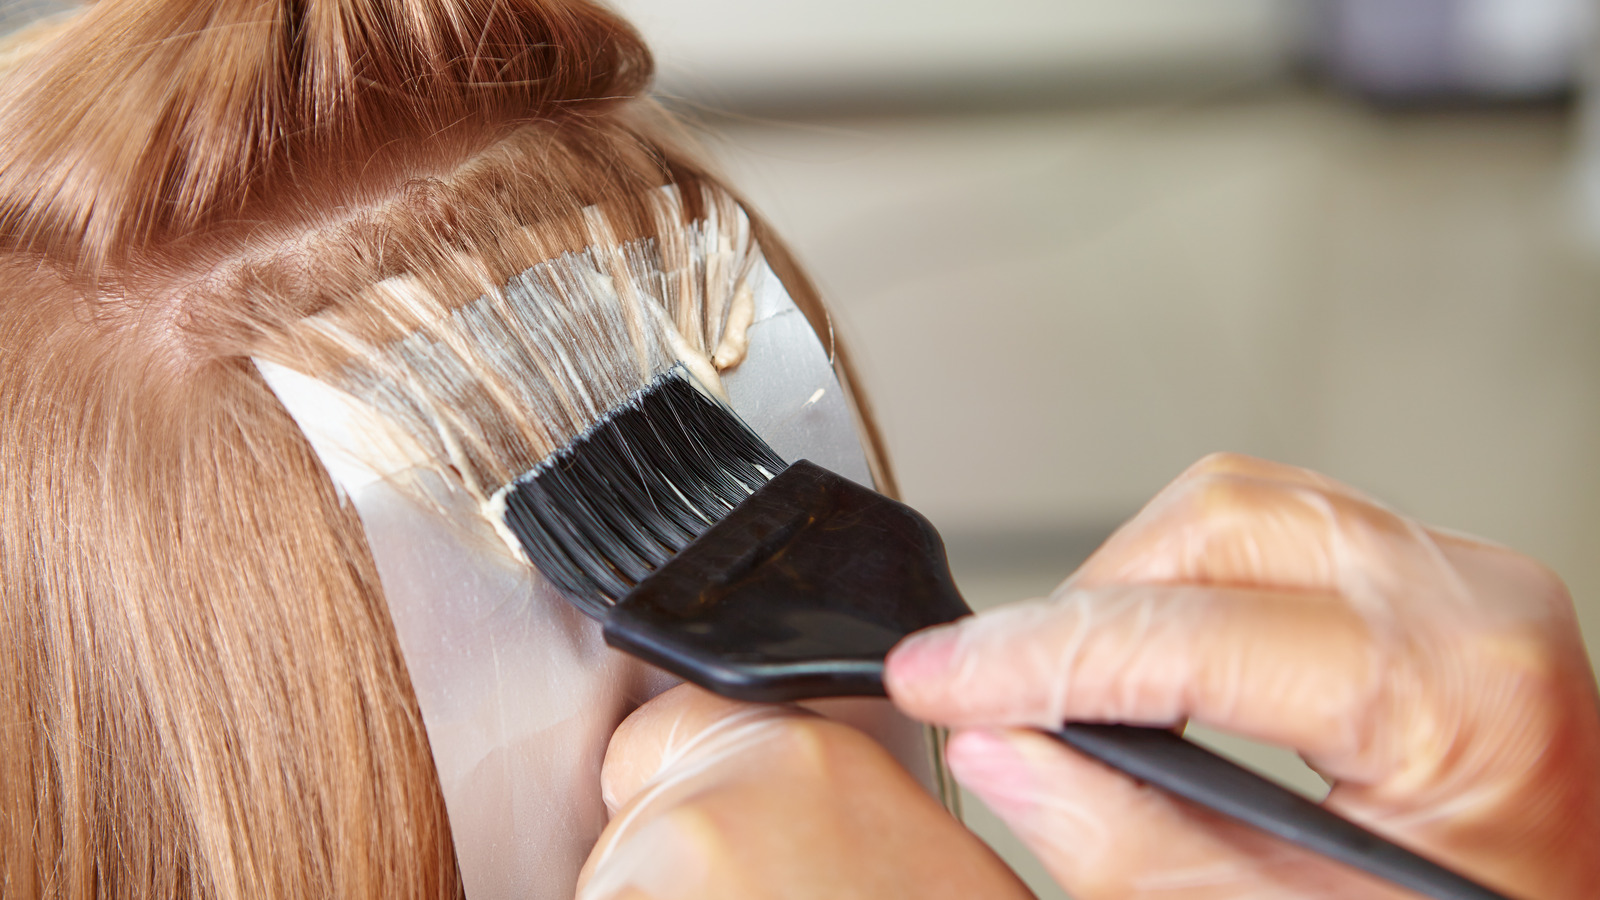 What You Need To Know About Hair Tinting